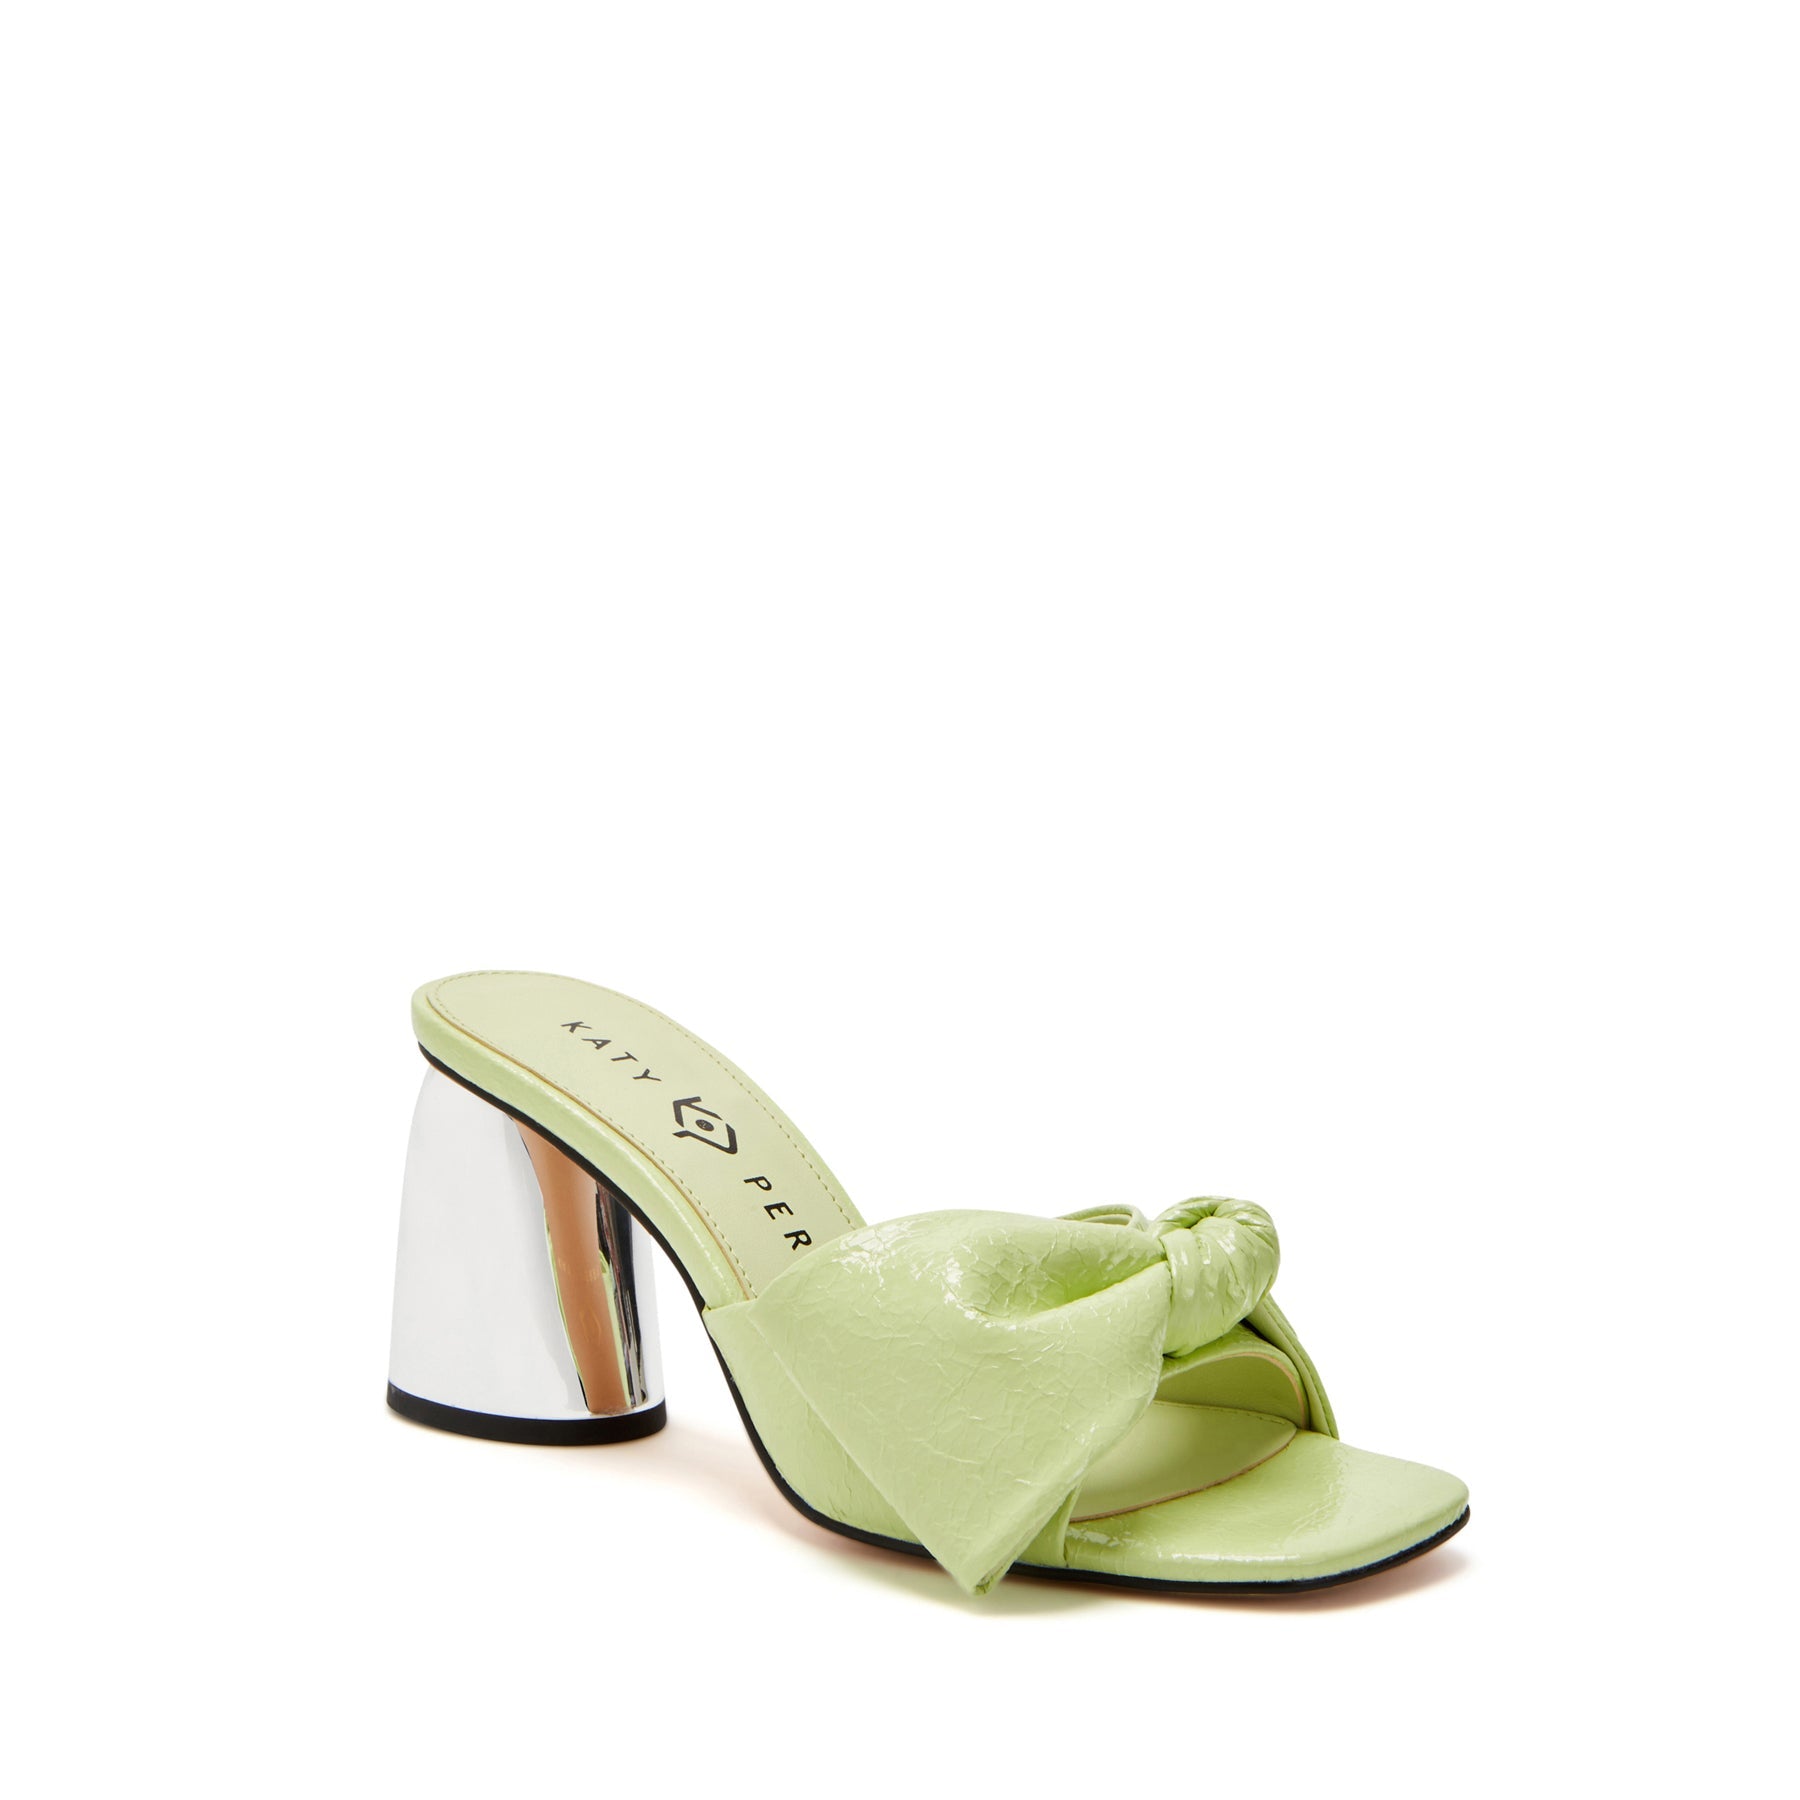 Katy Perry The Tooliped Twisted Sandal - Green Fig Multi - Green - 5.5